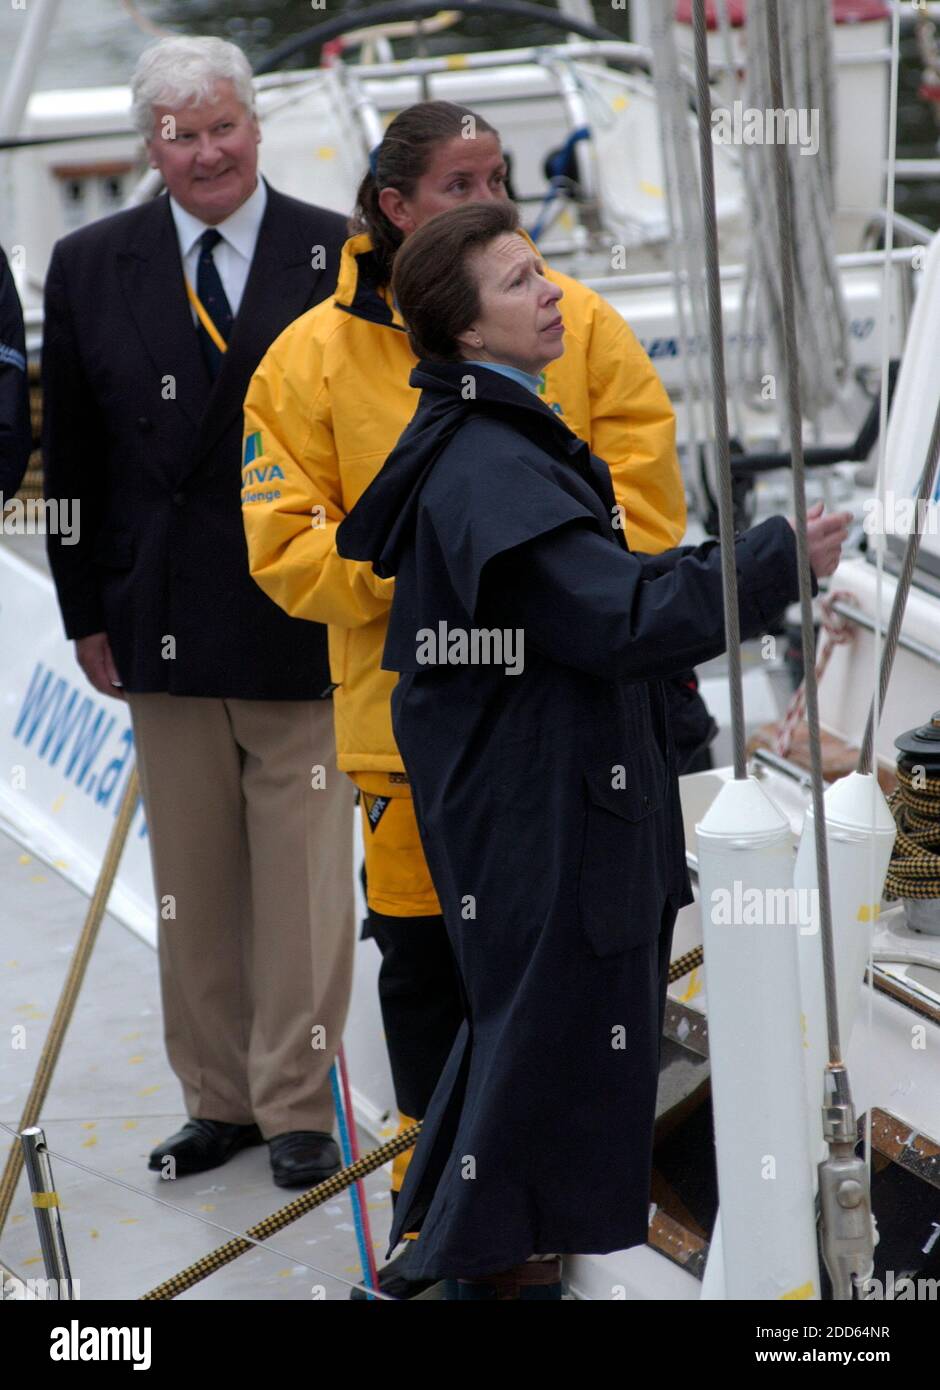 AJAXNETPHOTO. 21 MAY 2006, SOUTHAMPTON, ENGLAND - WRONG-WAY SOLO YACHTSWOMAN ARRIVES - DEE CAFFARI (33) (CENTRE) GIVES HRH PRINCESS ROYAL (PRINCESS ANNE) (FOREGROUND) AND VETERAN ROUND THE WORLD YACHTSMAN CHAY BLYTH (LEFT) A GUIDED TOUR OF HER YACHT AFTER SHE ARRIVED AT OCEAN VILLAGE AFTER HER SINGLE HANDED NON-STOP, SIX MONTH, 29,100 MILE EAST TO WEST CIRCUMNAVIGATION.  SHE CROSSED THE OFFICIAL FINISH LINE BETWEEN THE LIZARD AND USHANT (OUISSANT) ON 18 MAY, 178 DAYS AFTER SETTING OUT FROM PORTSMOUTH IN THE 71FT CUTTER AVIVA. HRH THE PRINCESS ROYAL, VETERAN YACHTSMAN SIR CHAY BLYTH AND M/S CAF Stock Photo